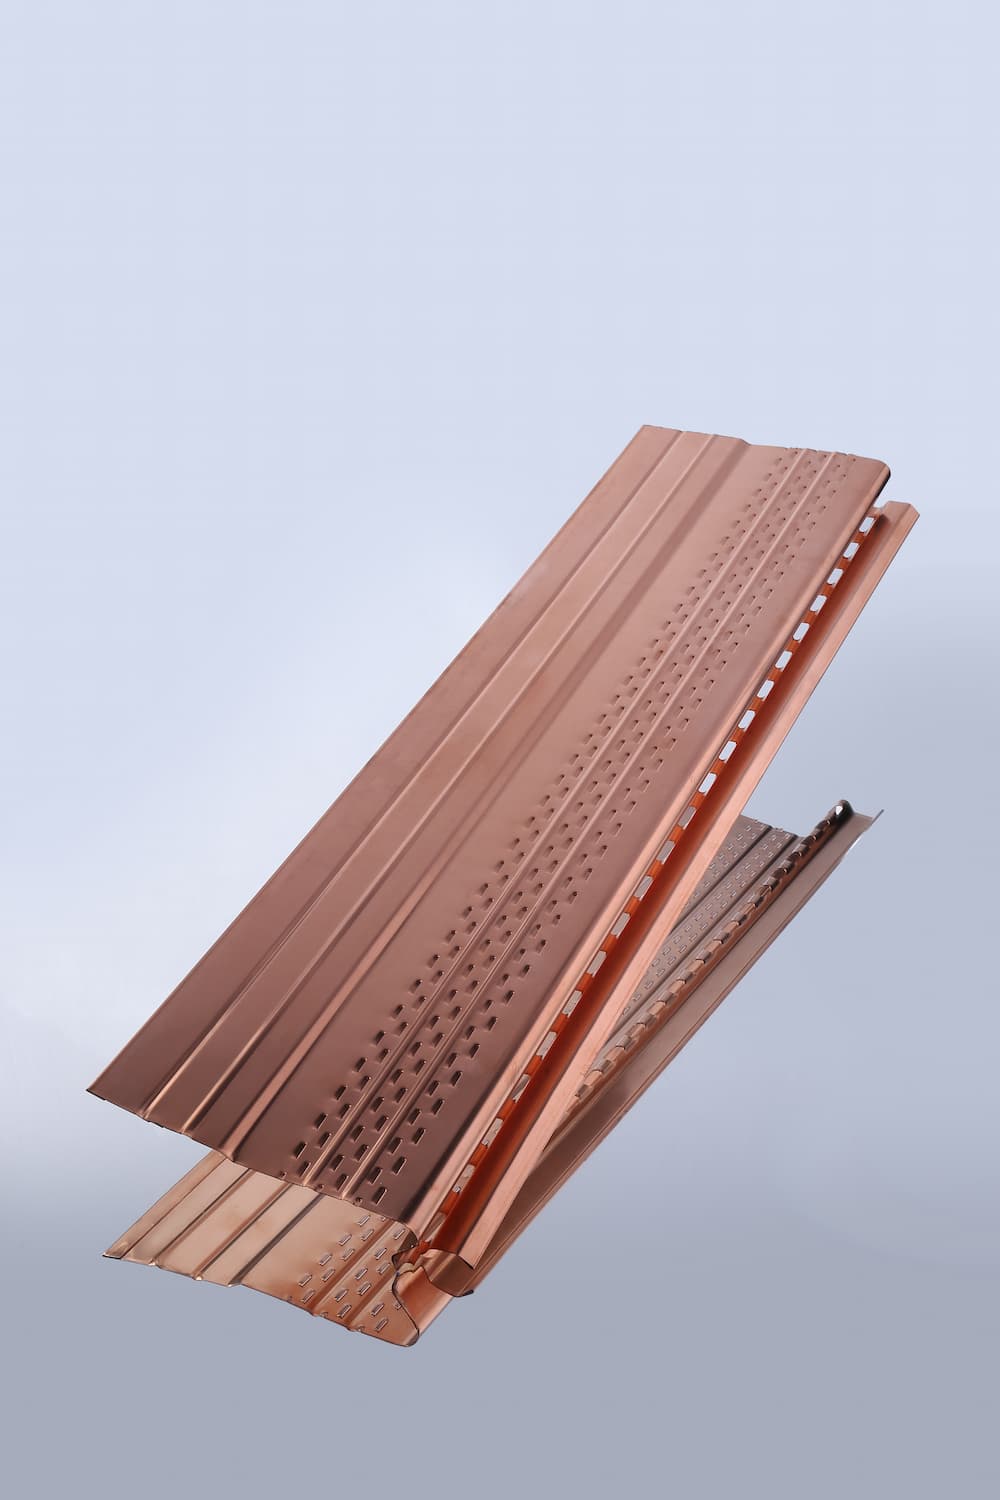 COPPER/16.ox/gutter/guards/protection/guard/copper/supply/gutter/manufacturing//gutter/guard/gutter/guards/gutter/screen/gutter/protection/